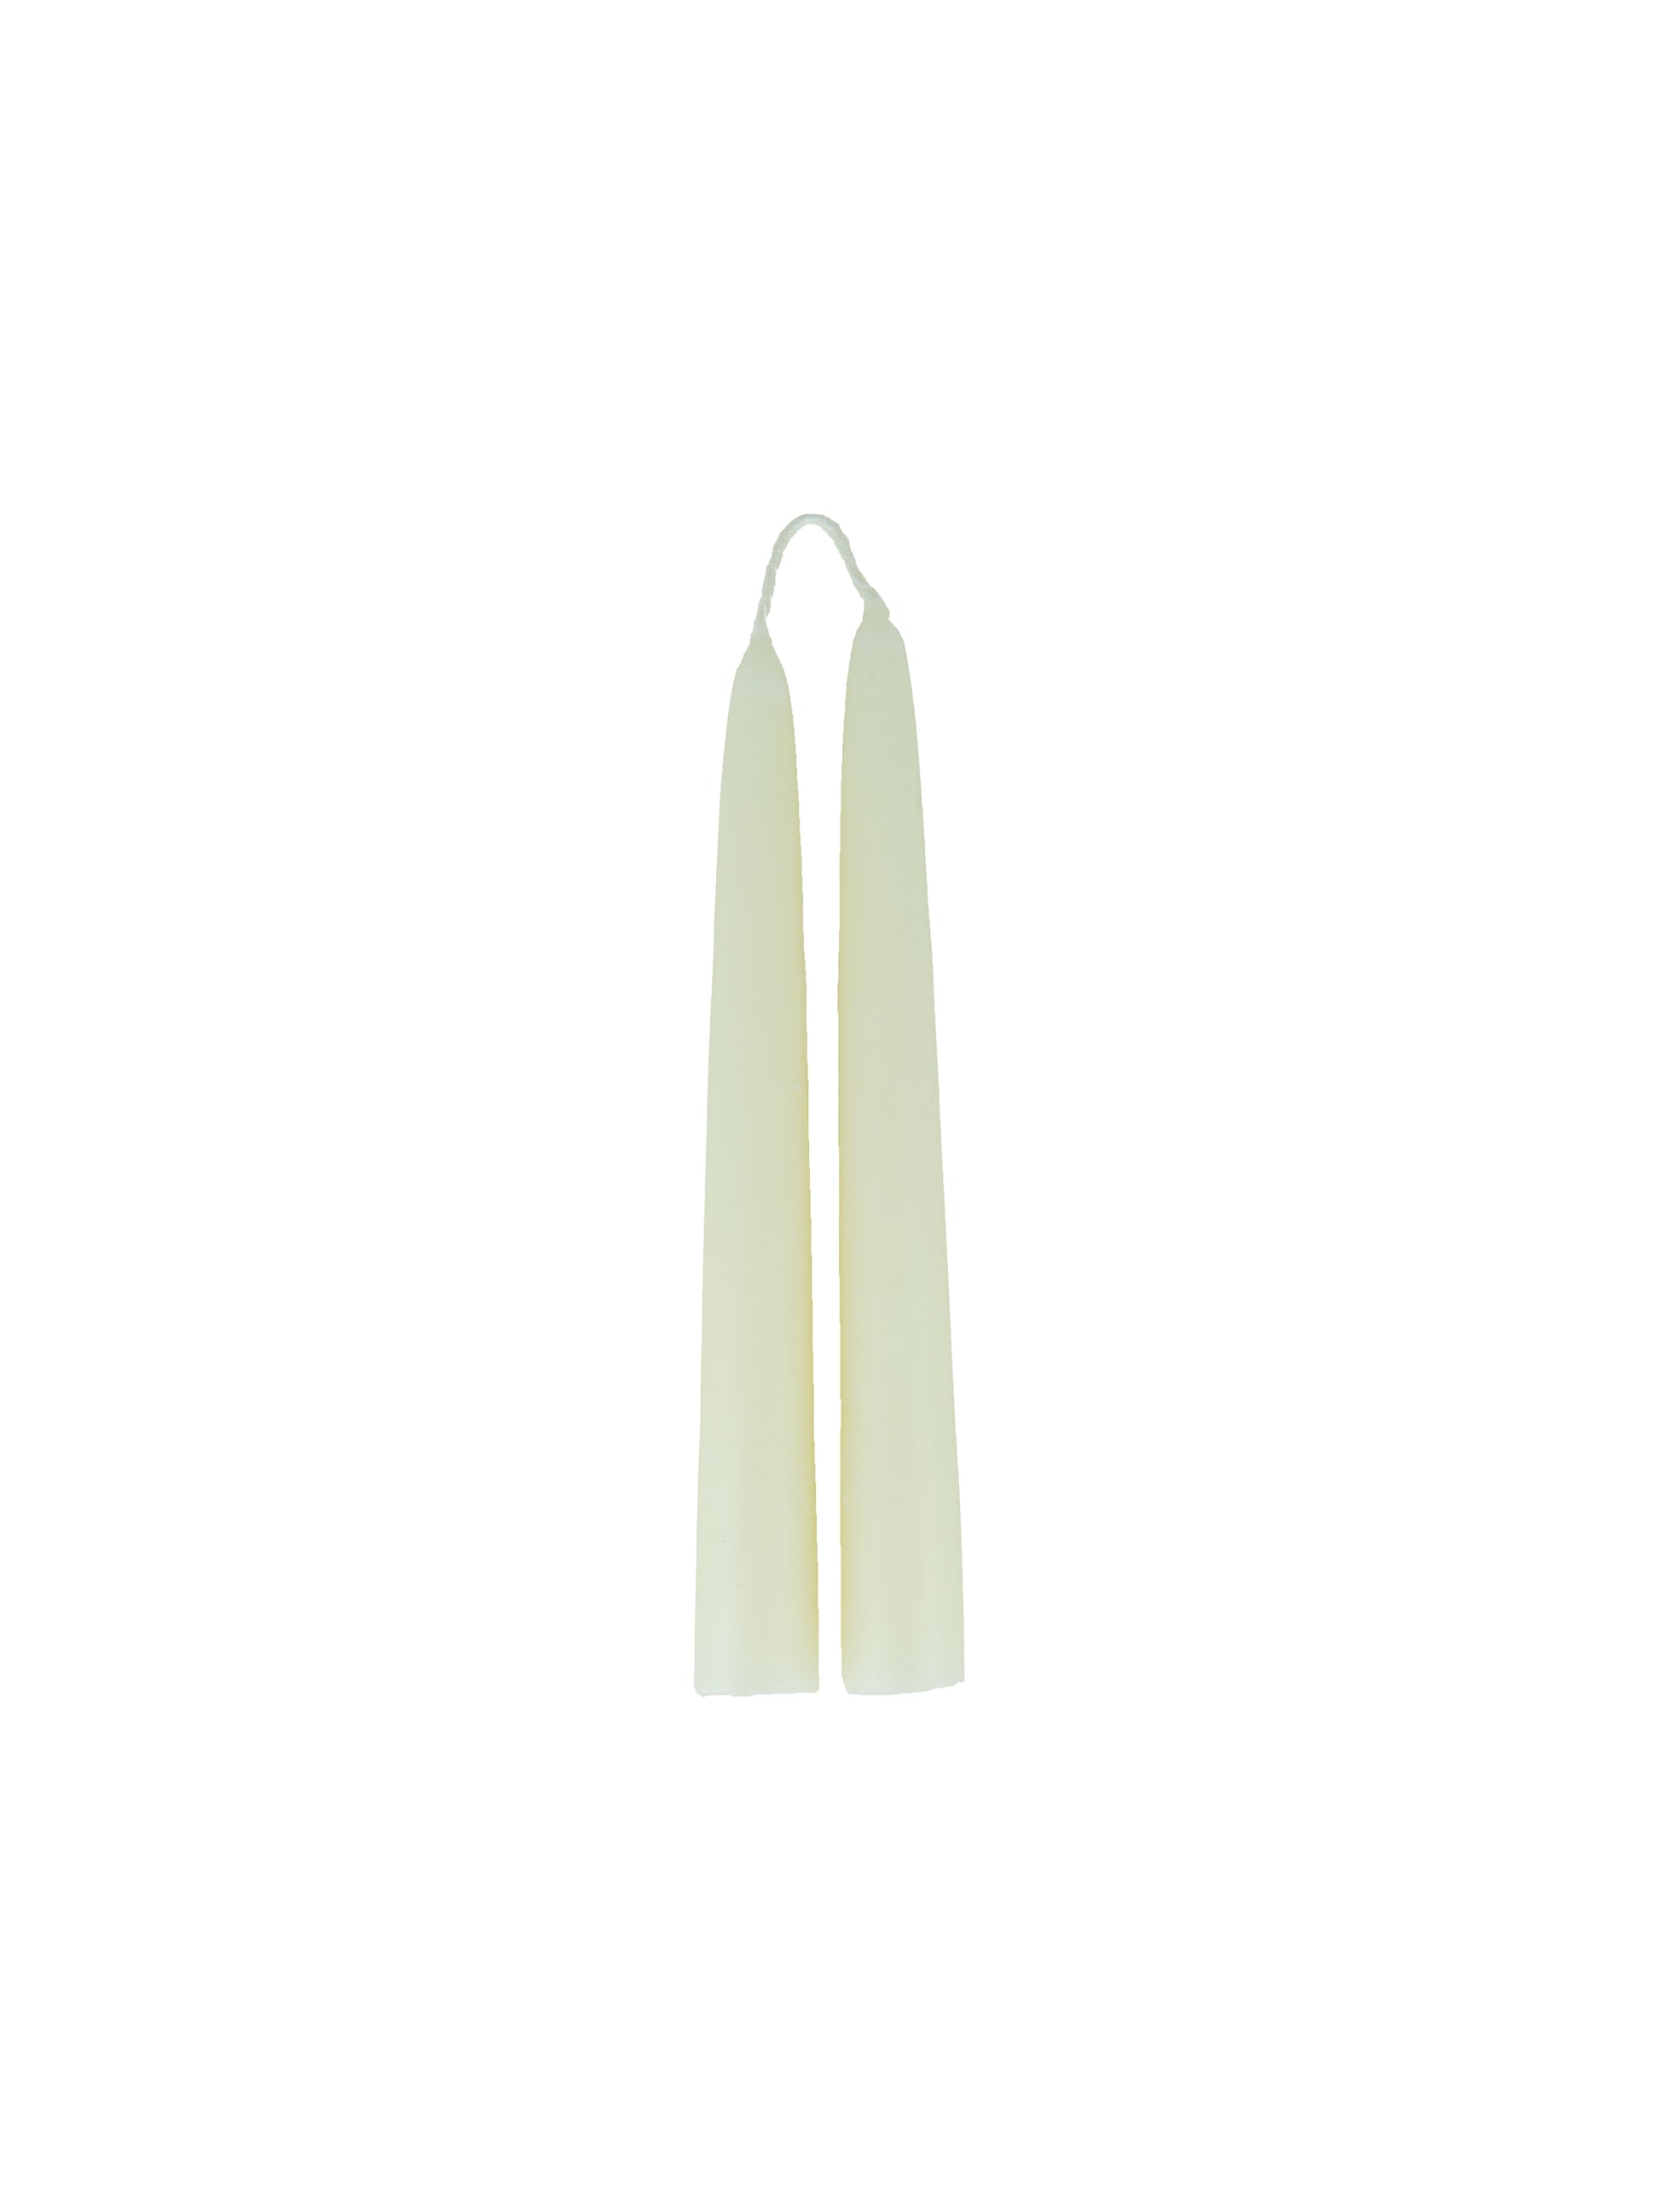 MATCH Pewter Beeswax Taper Candles 8 H Ivory Weston Table